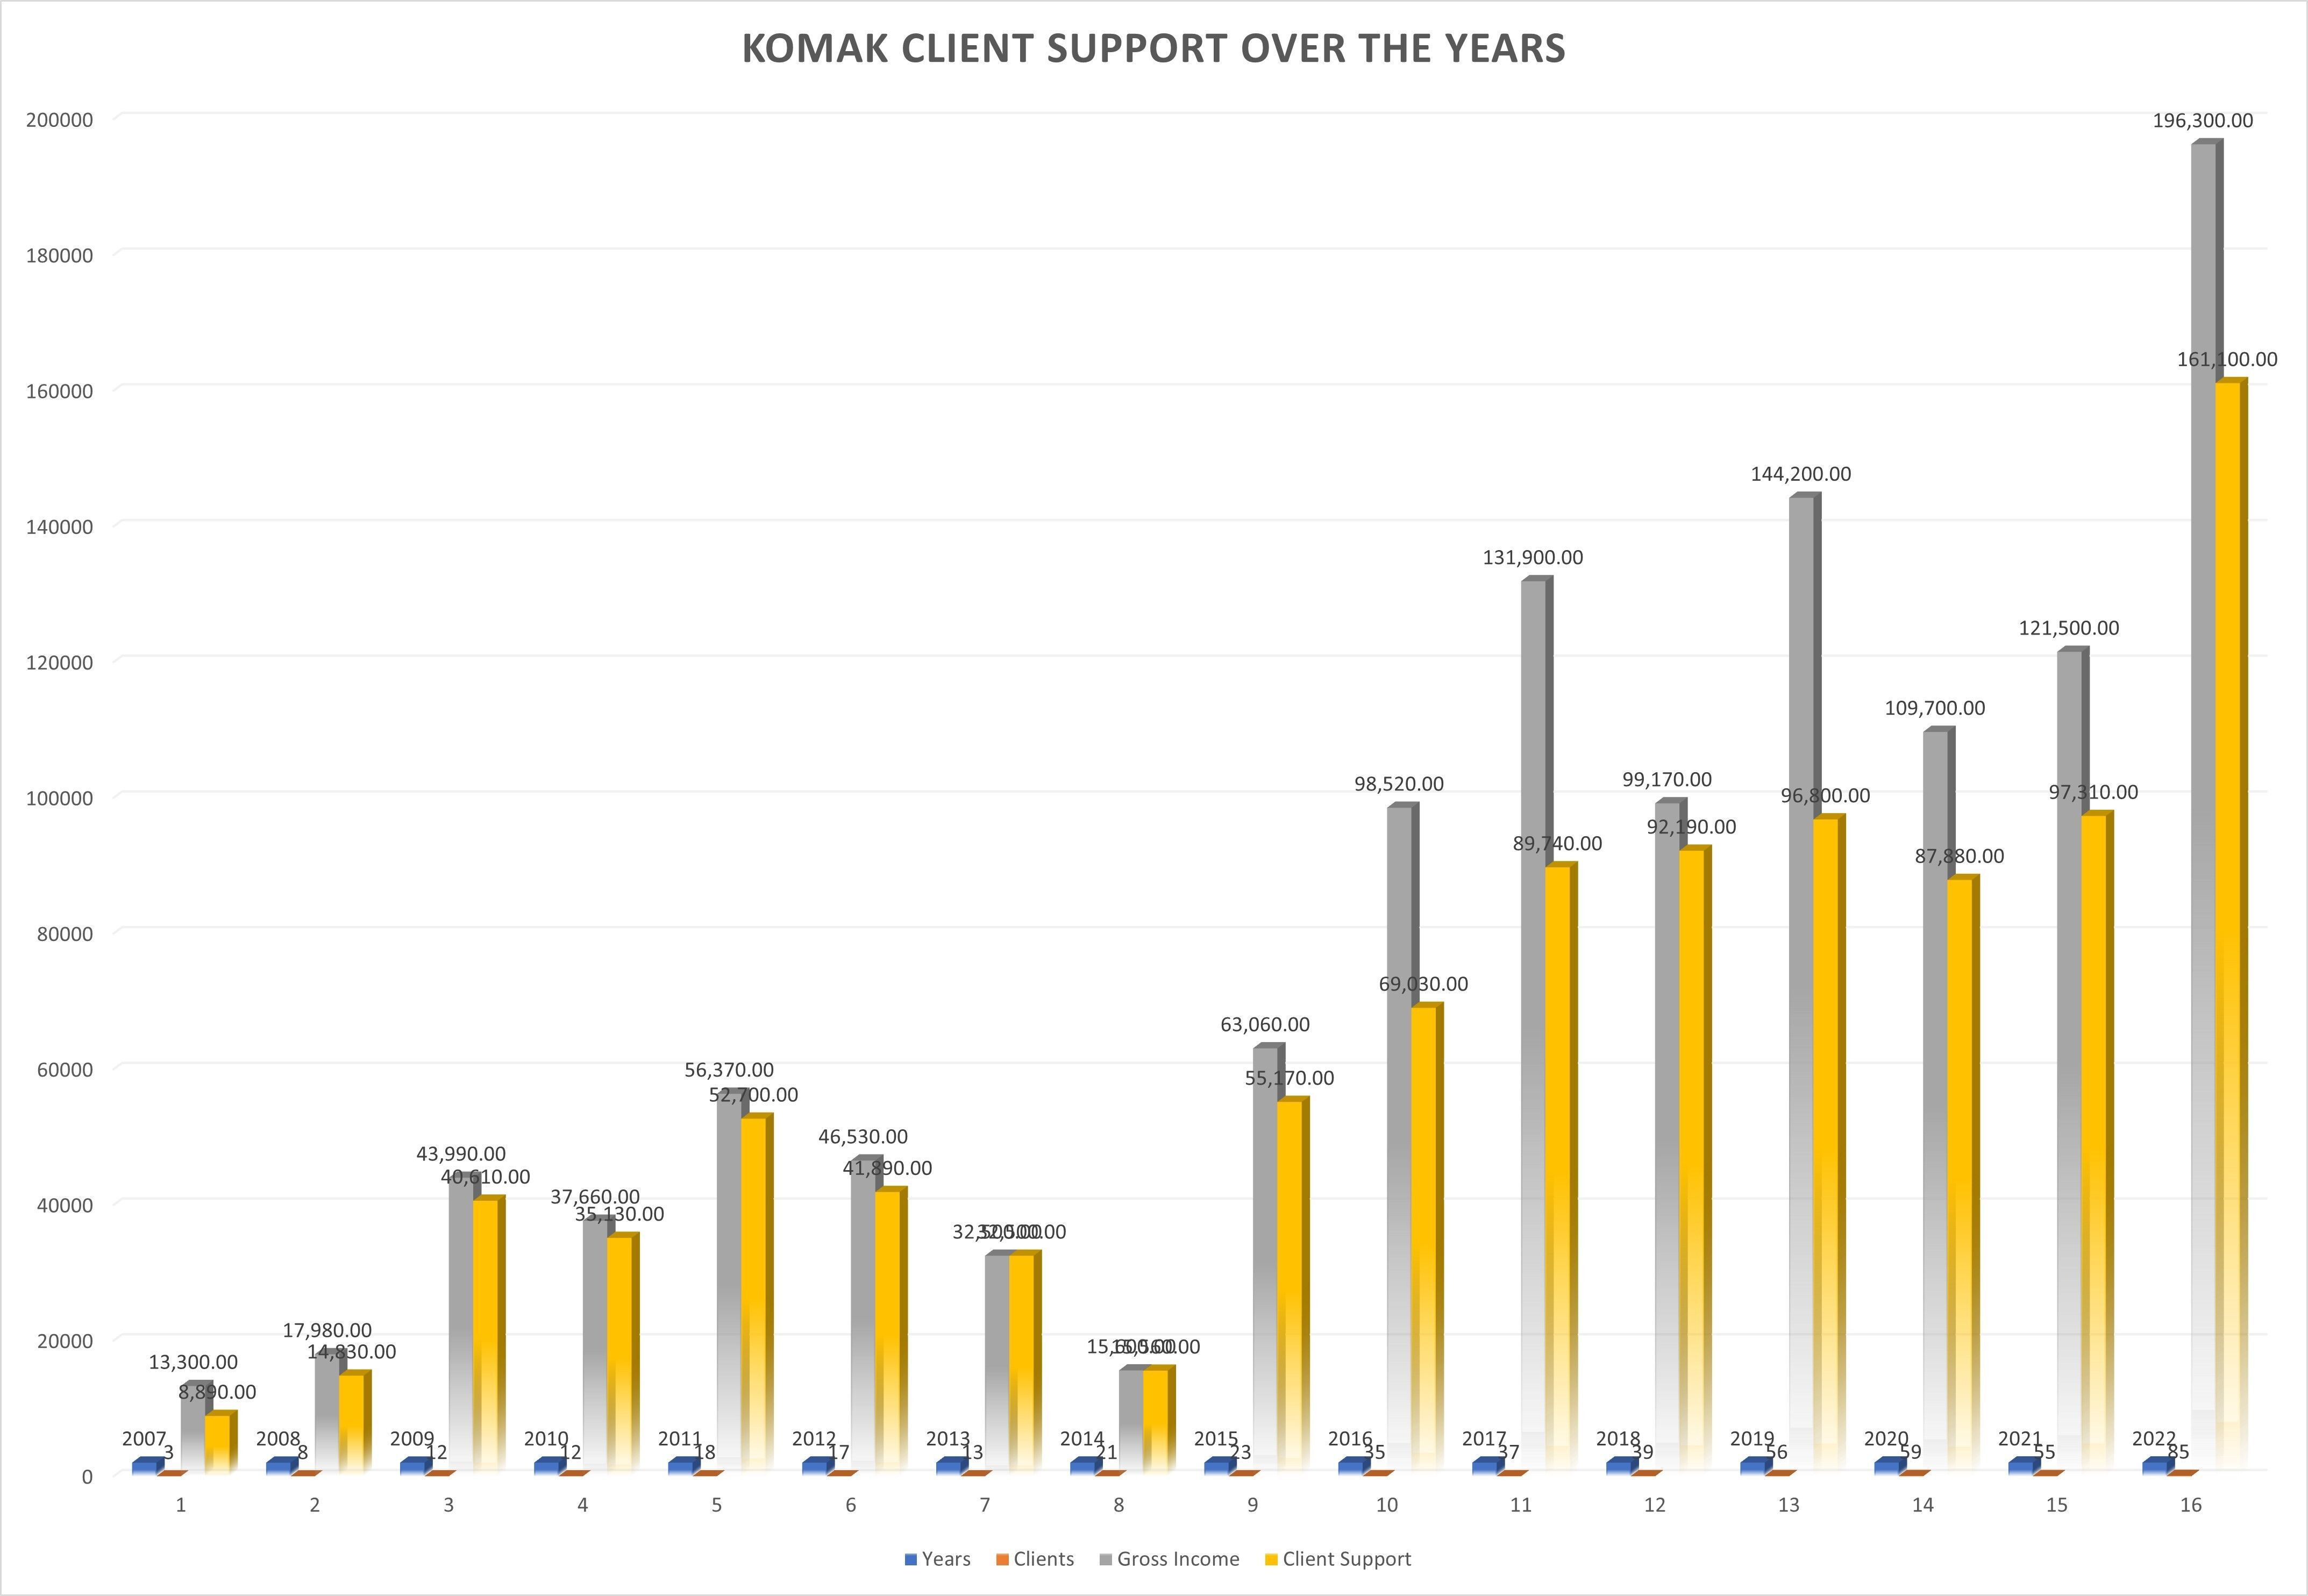 Gross Income and Client Support